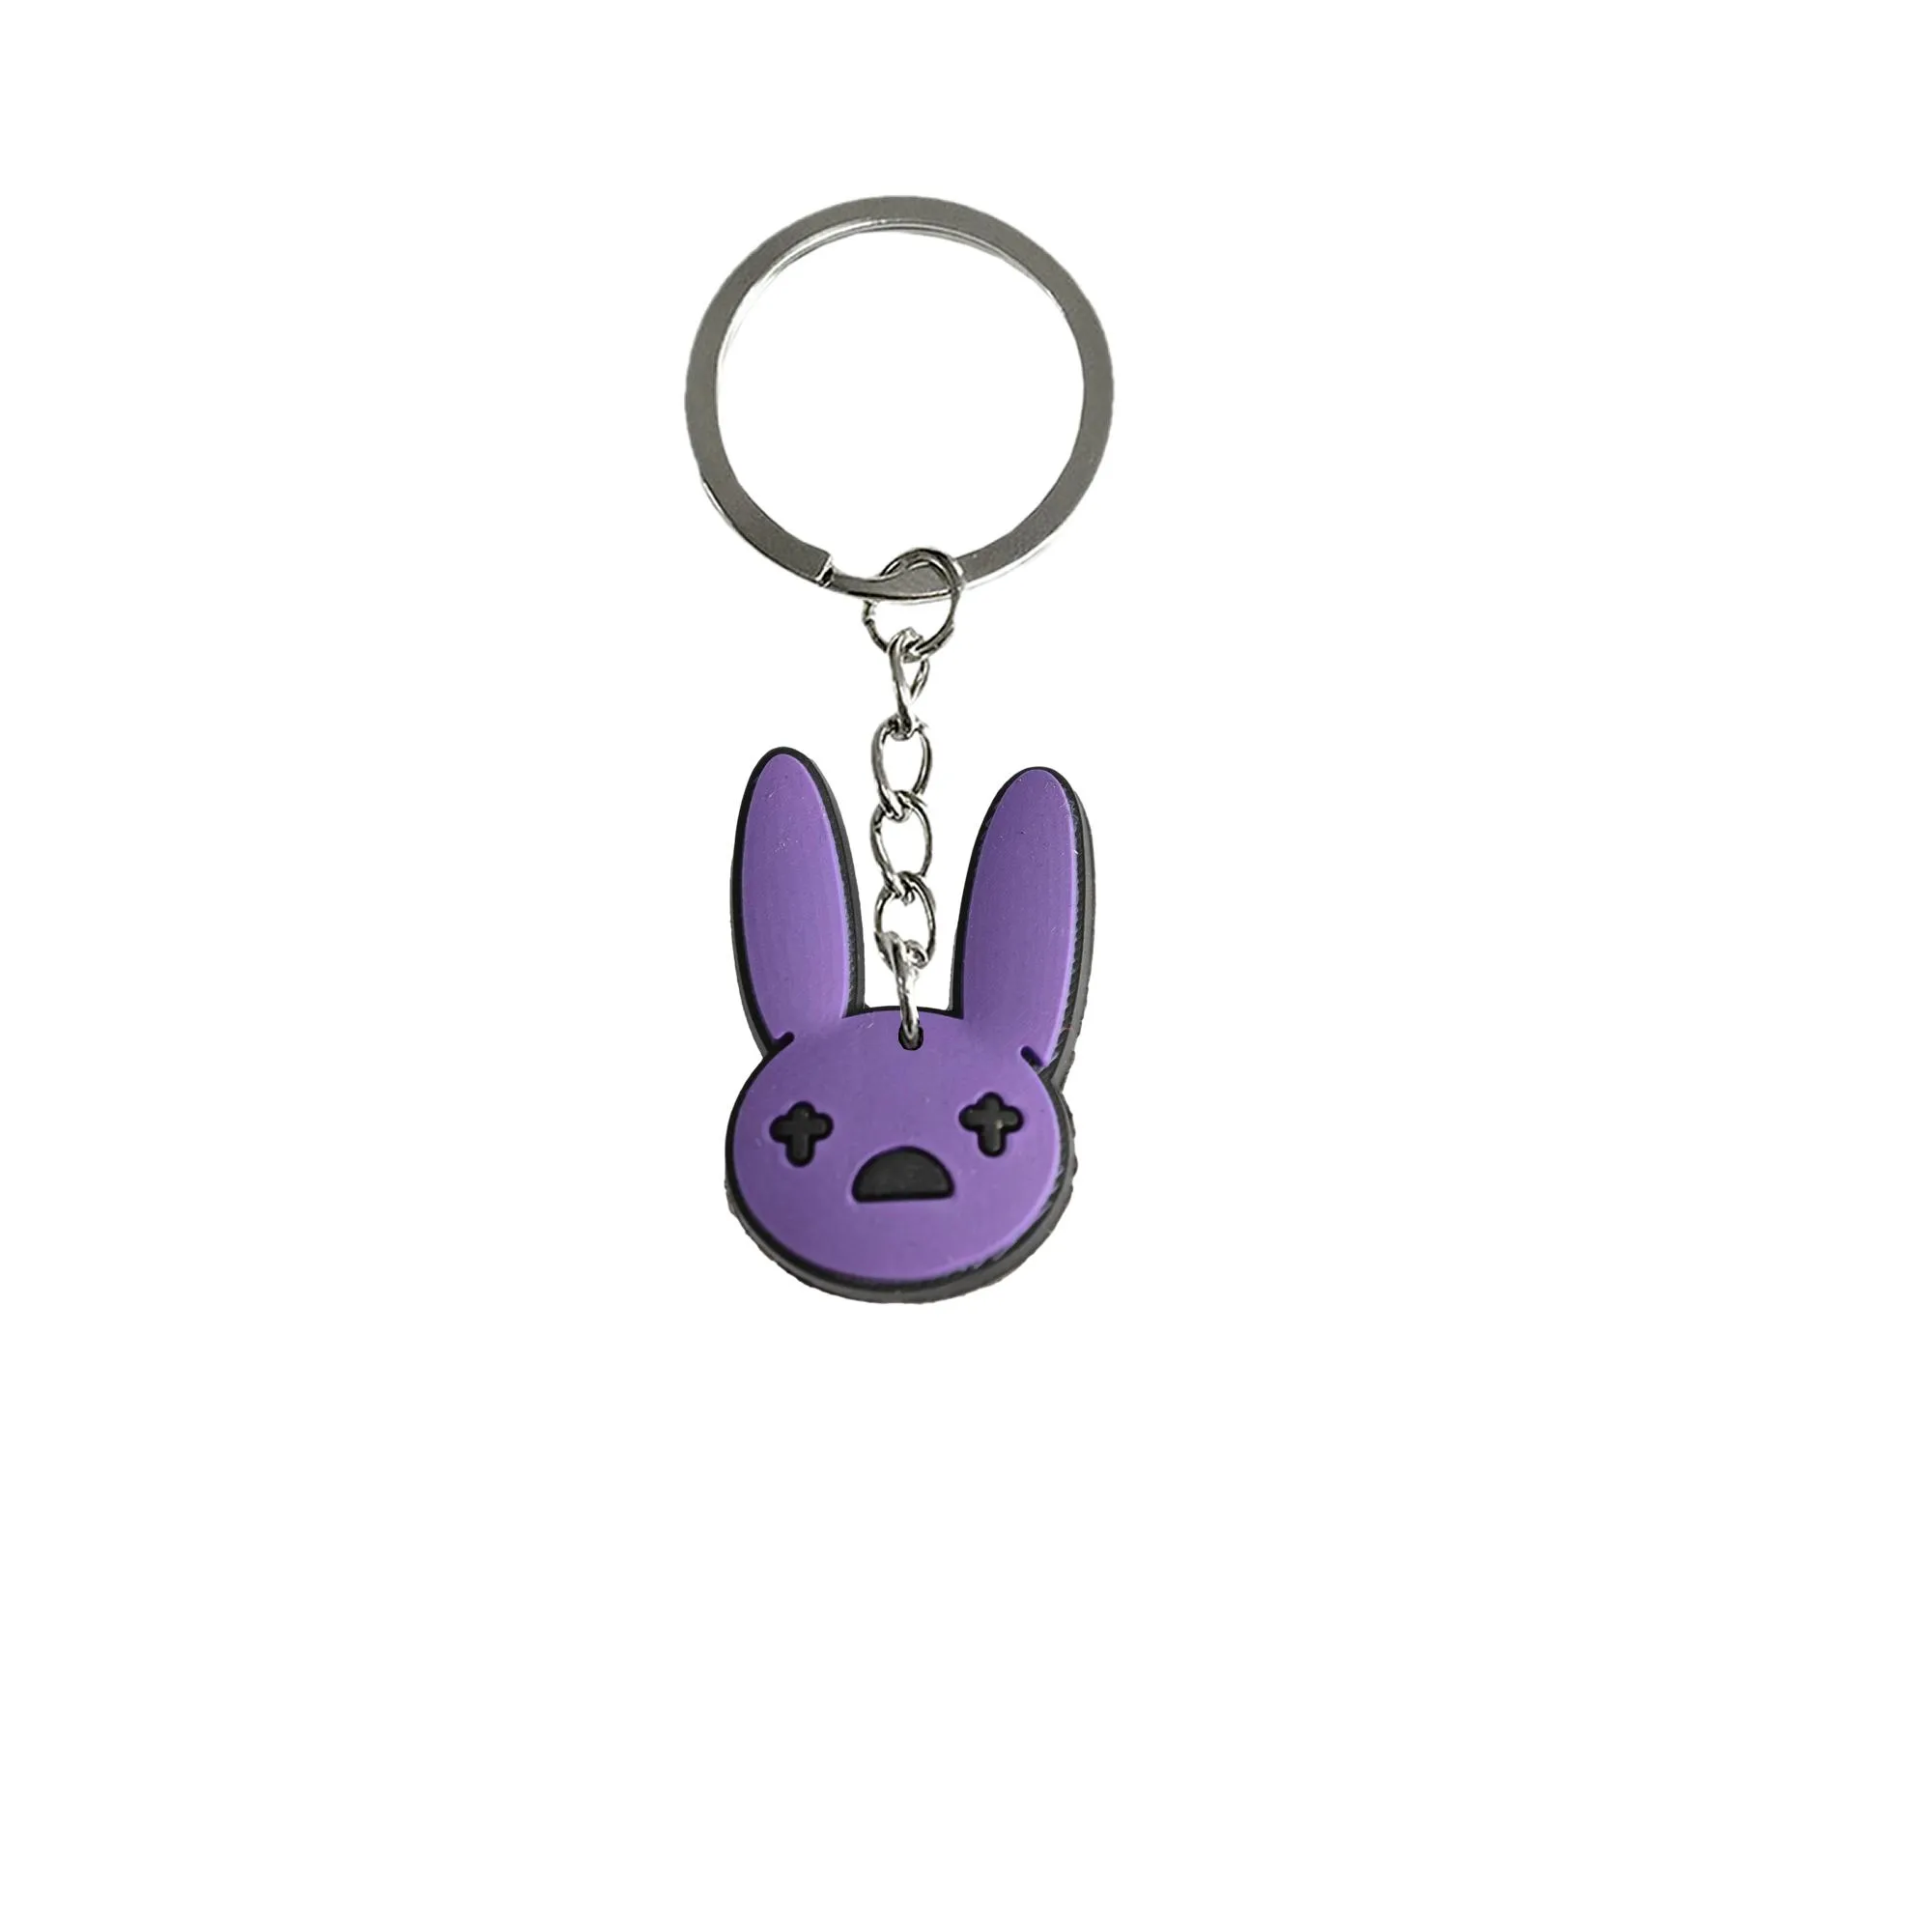 bad rabbit 51 keychain for goodie bag stuffers supplies car keyring keychains boys suitable schoolbag backpacks key chain party favors gift cute silicone adult